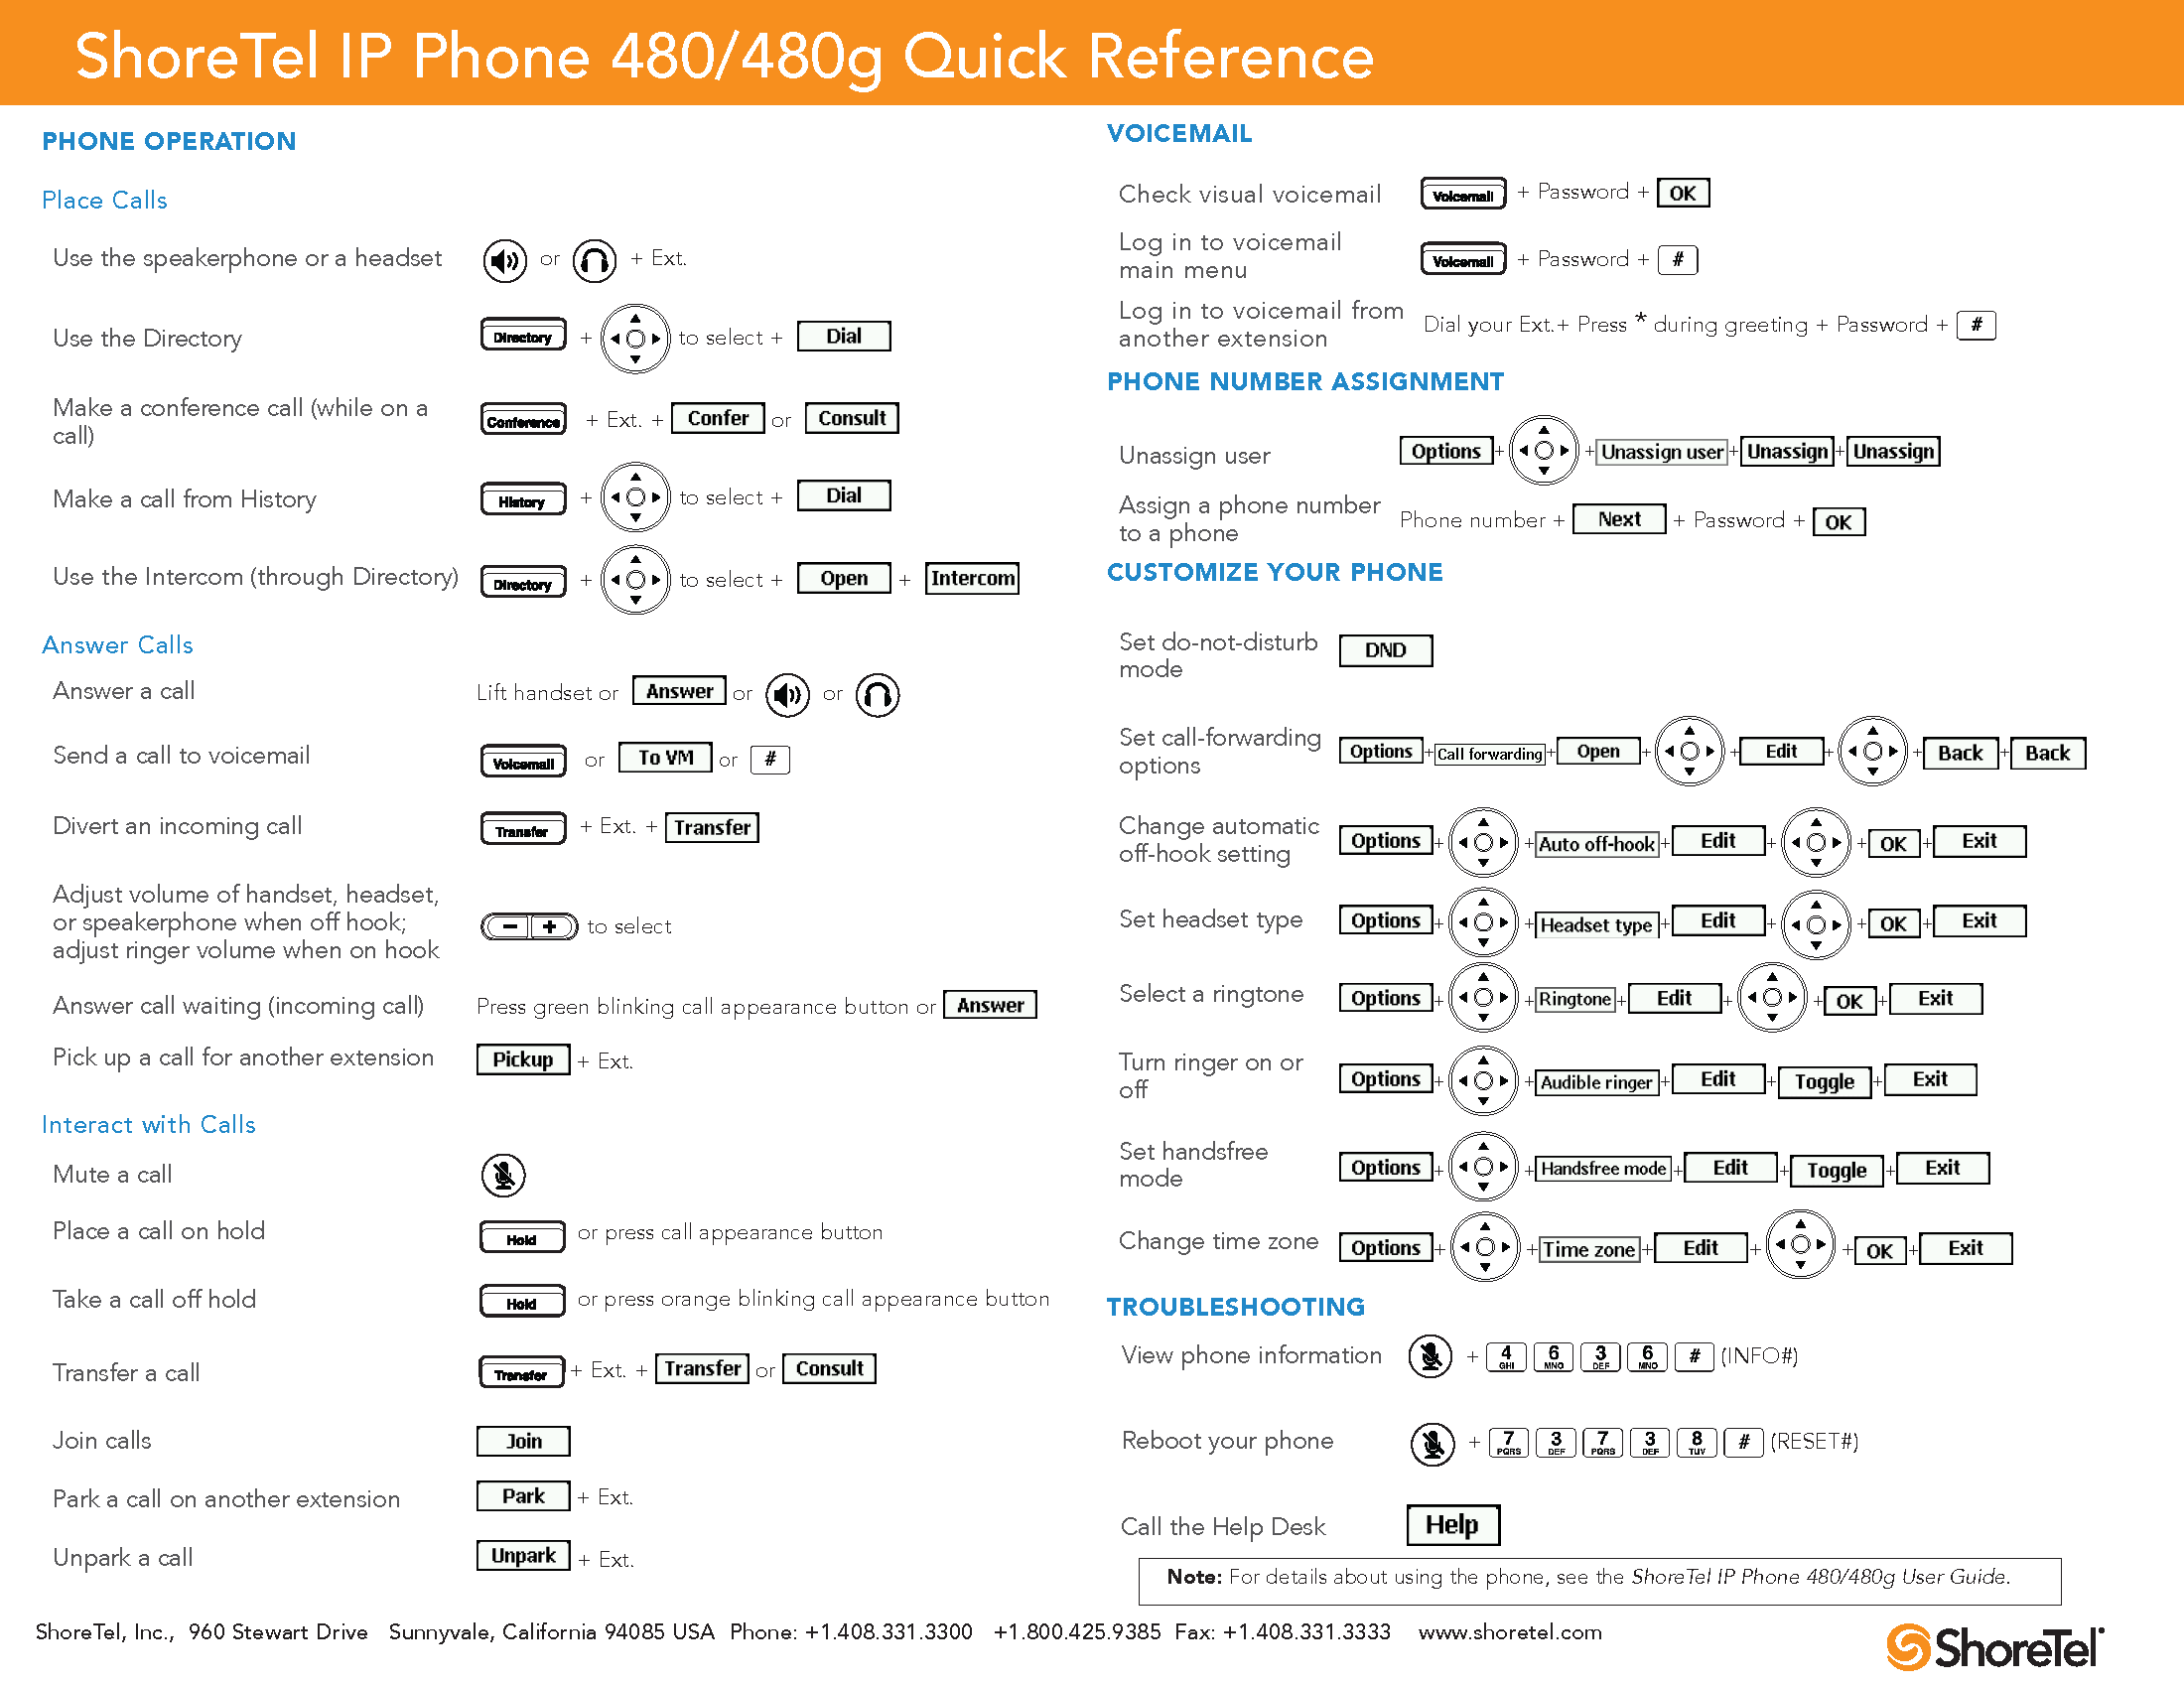 ShoreTel/Mitel 480 Quick Reference Guide – King's College